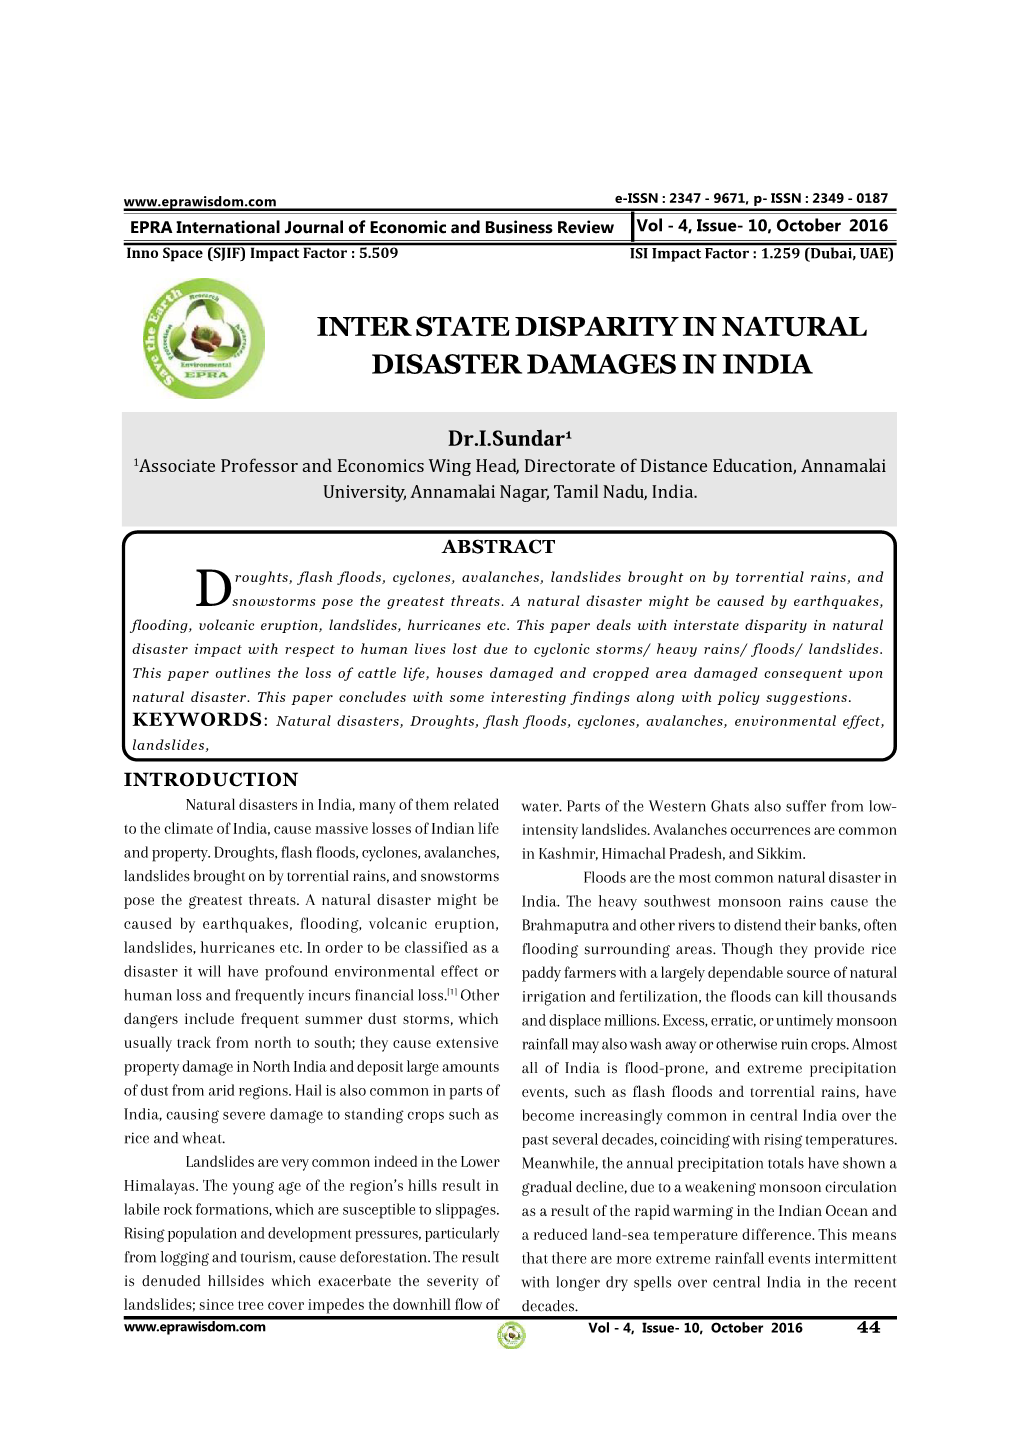 Inter State Disparity in Natural Disaster Damages in India